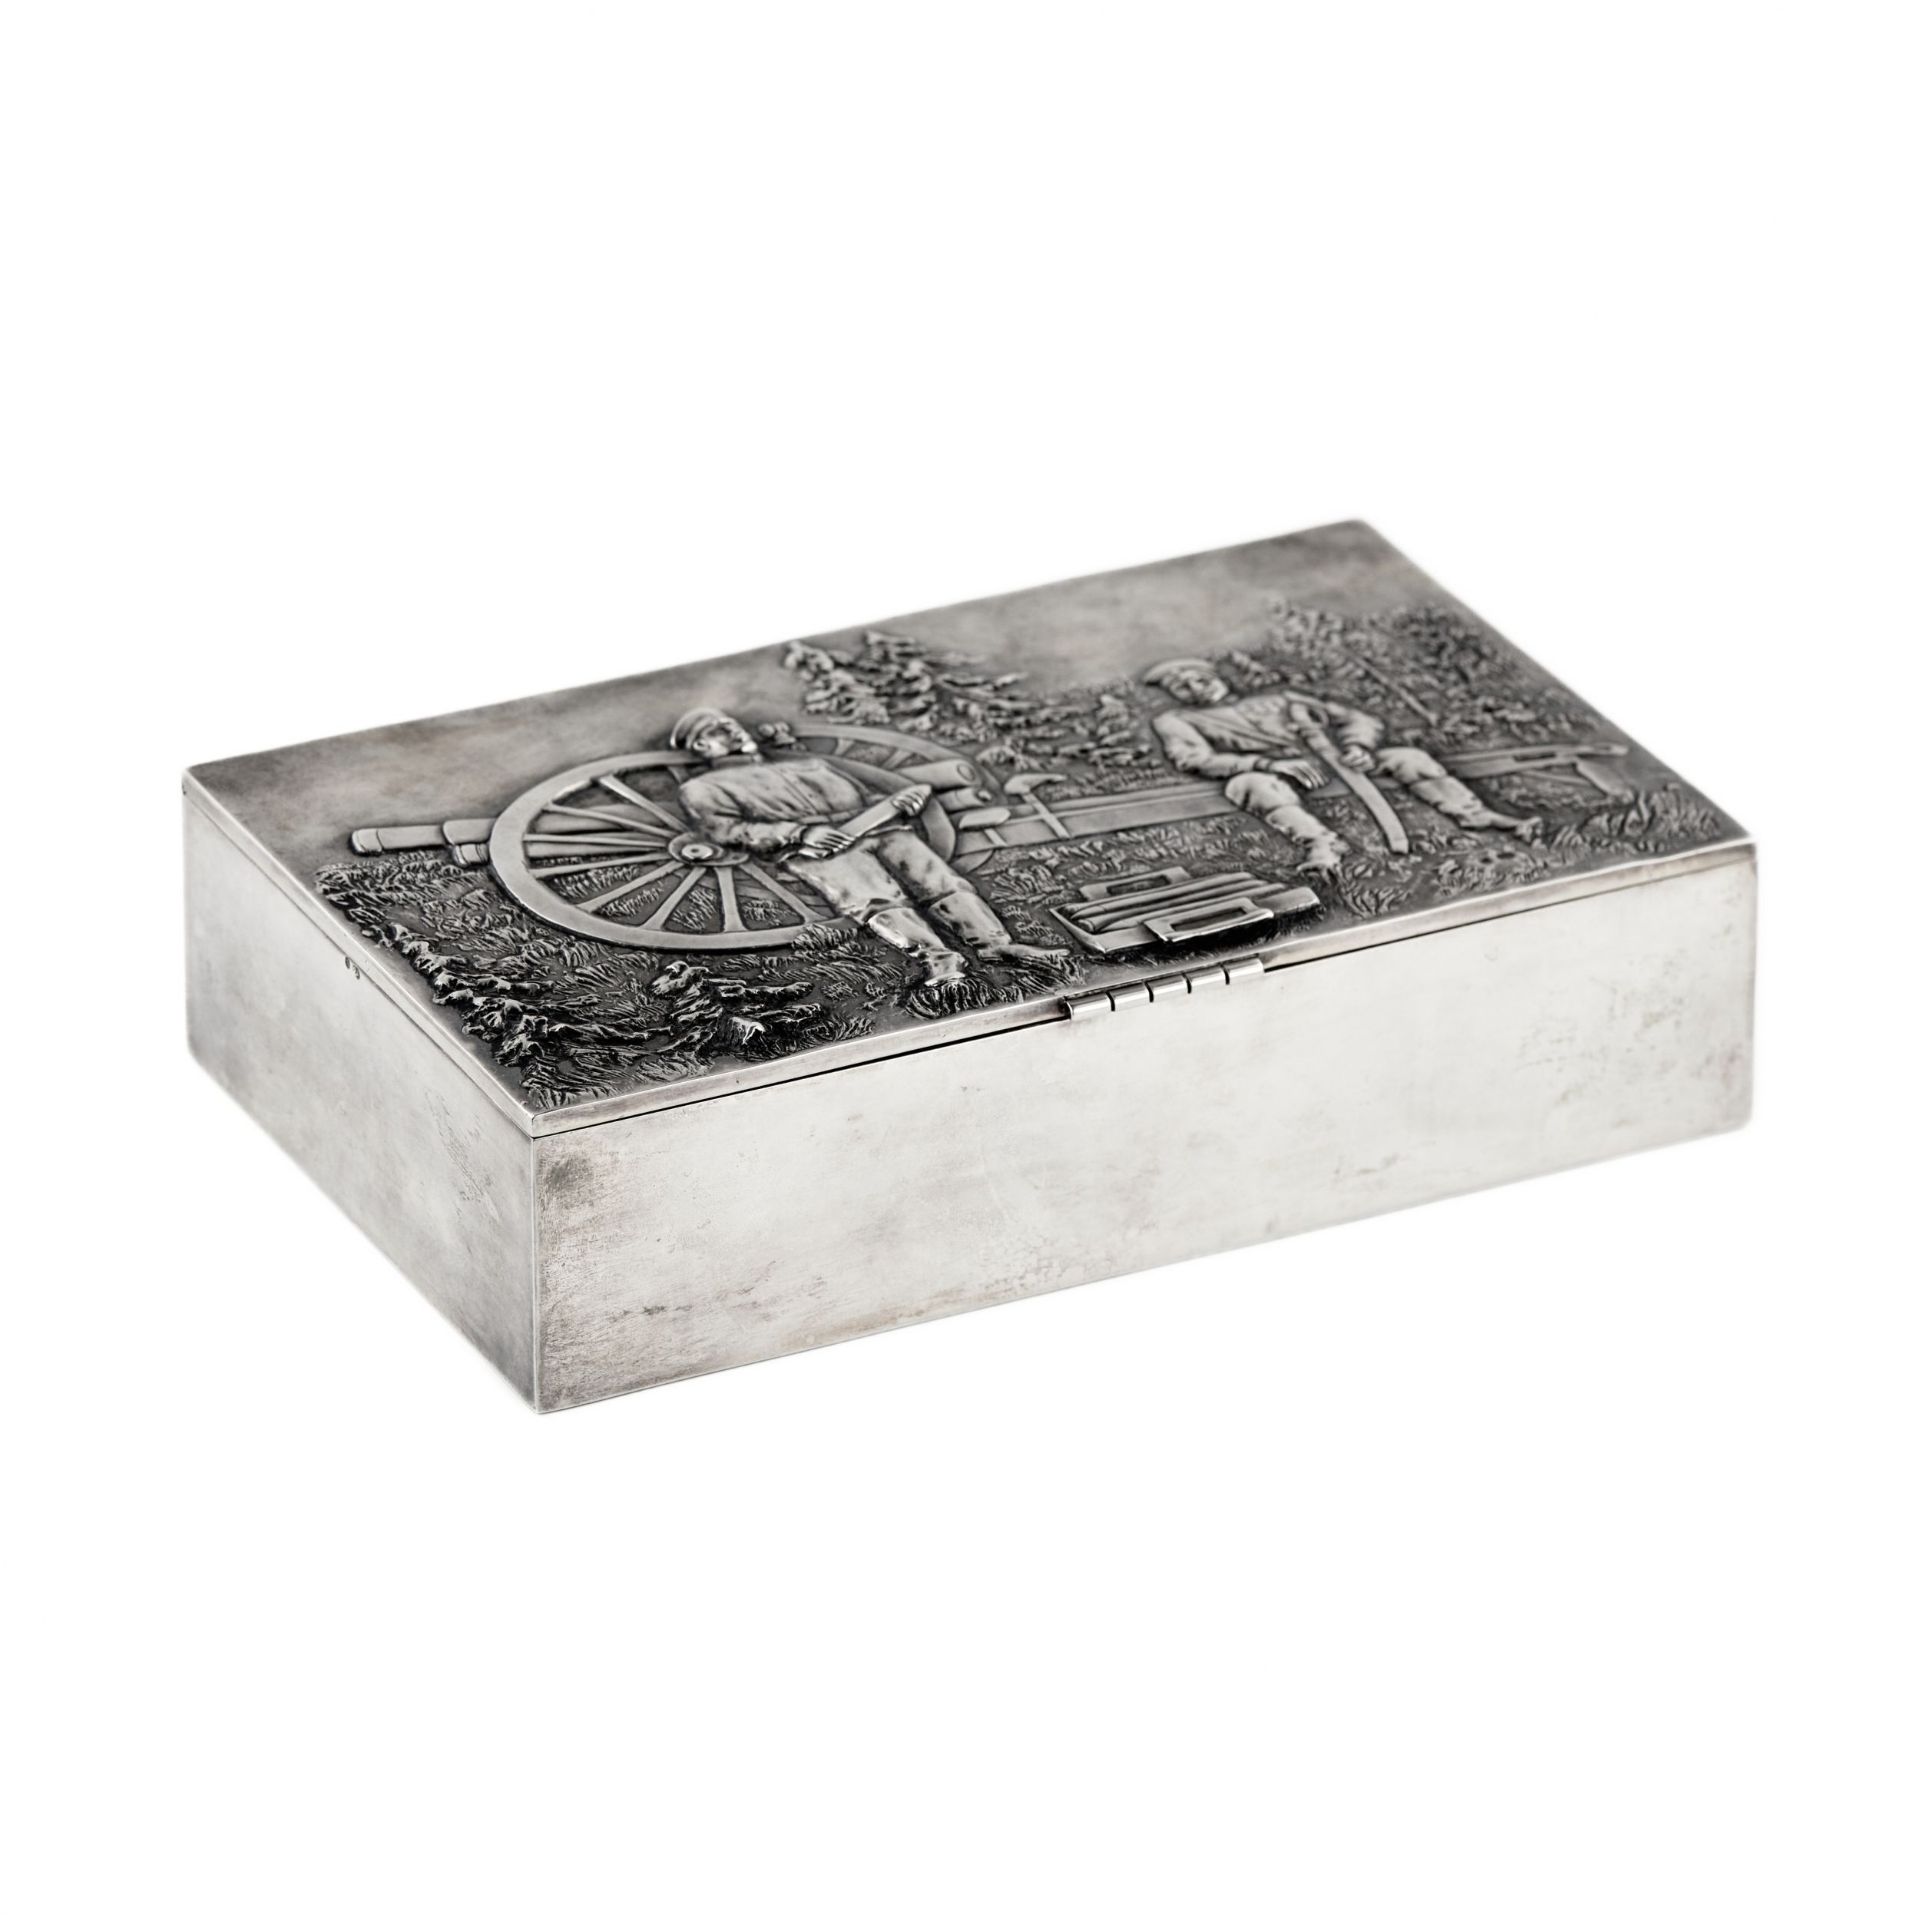 Massive, silver cigar box. Glory to Russian weapons. 2 Moscow artel. 20th century - Image 2 of 8